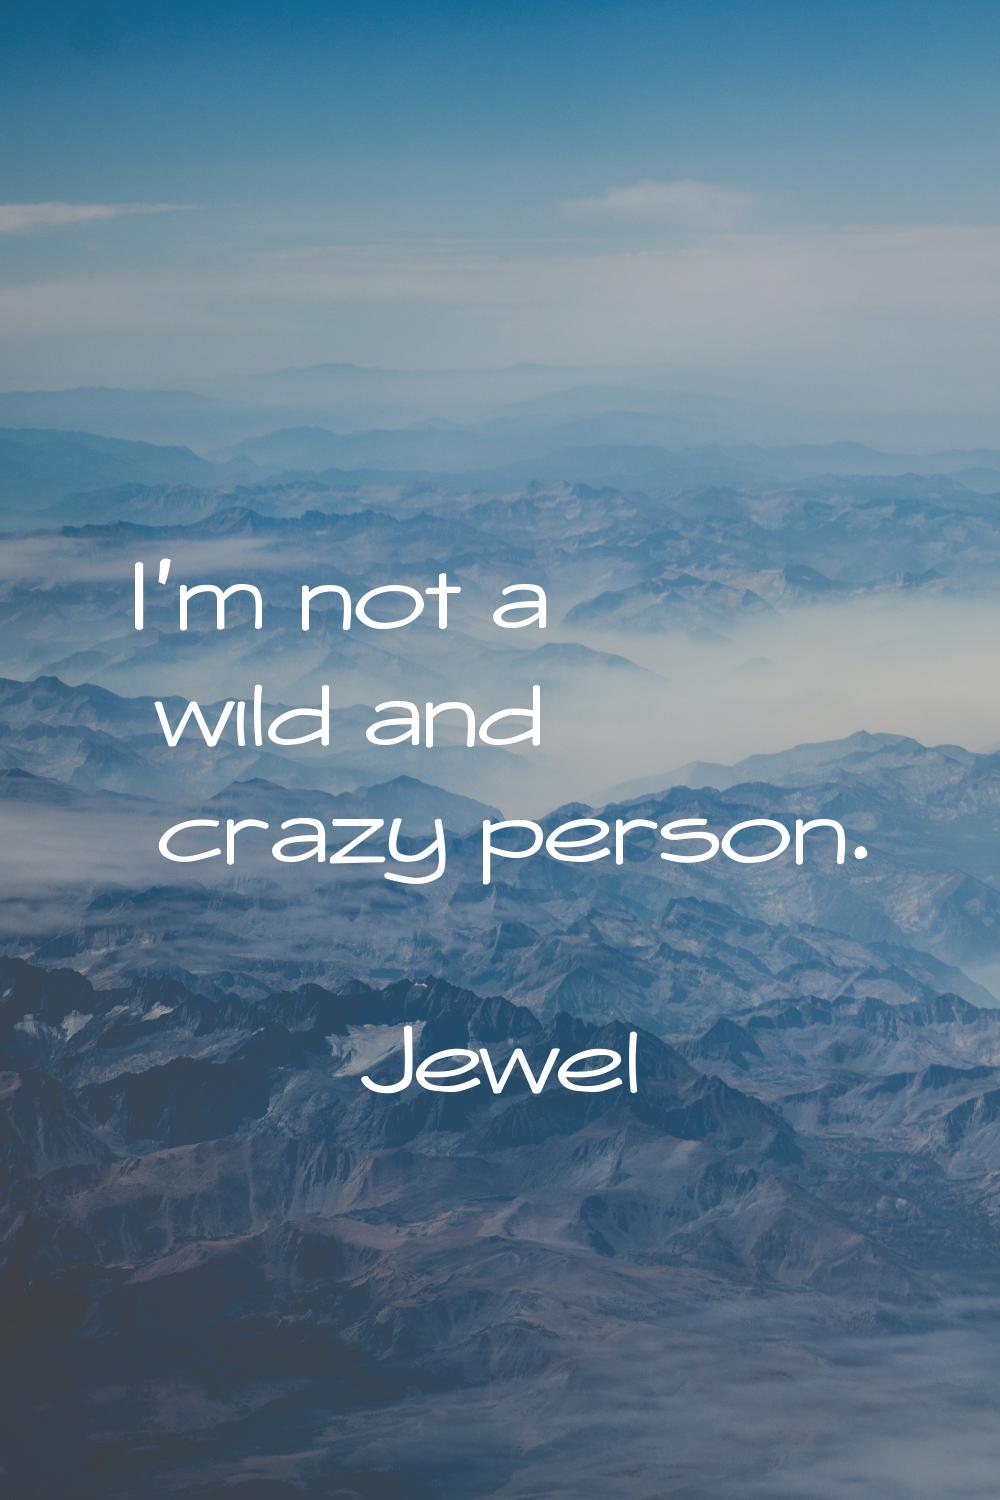 I'm not a wild and crazy person.